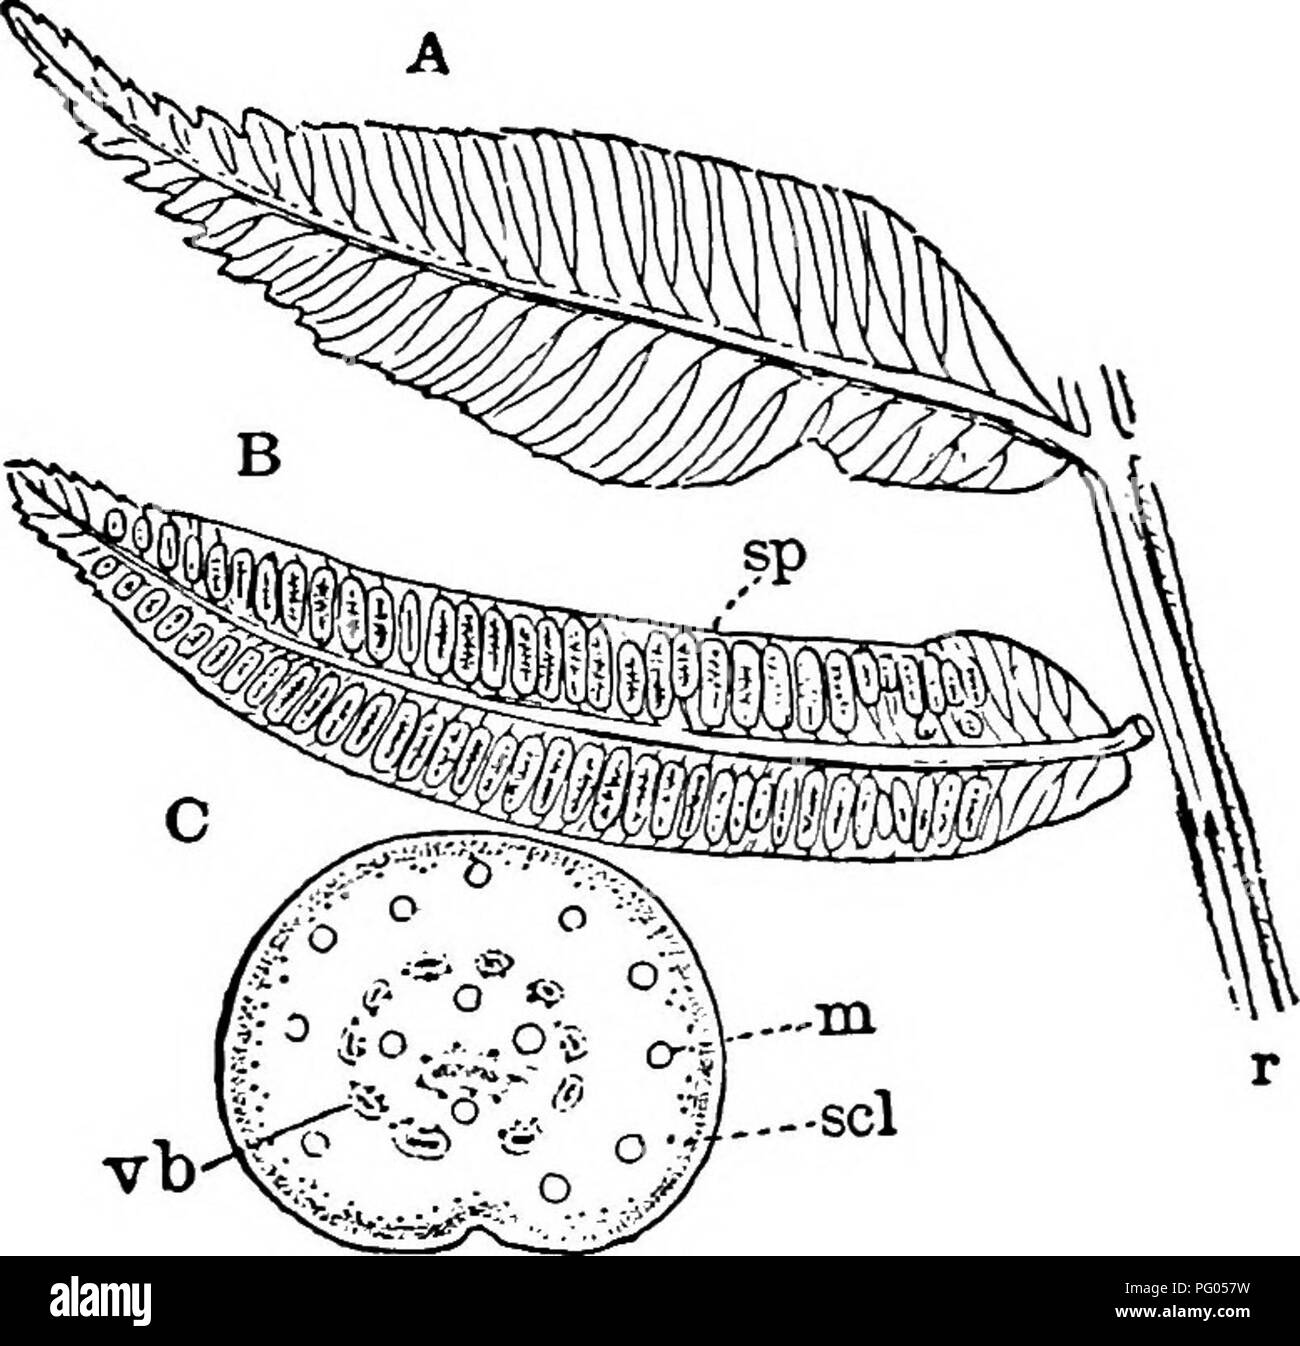 . The structure and development of mosses and ferns (Archegoniatae). Plant morphology; Mosses; Ferns. MARATTIALES 299 Marattia includes about twelve species of tropical and sub- tropical Ferns, both of the Old World and the New. Kaul- fiissia includes but a single species, belonging to southeastern Asia. The synangia are scattered over the lower surface of the palmate leaf, and are circular, with a central space into which the separate loculi open by a slit, as in Marattia. Kaul- fussia is characterised by very large pores upon the lower side of the leaf. A study of the development of these sh Stock Photo